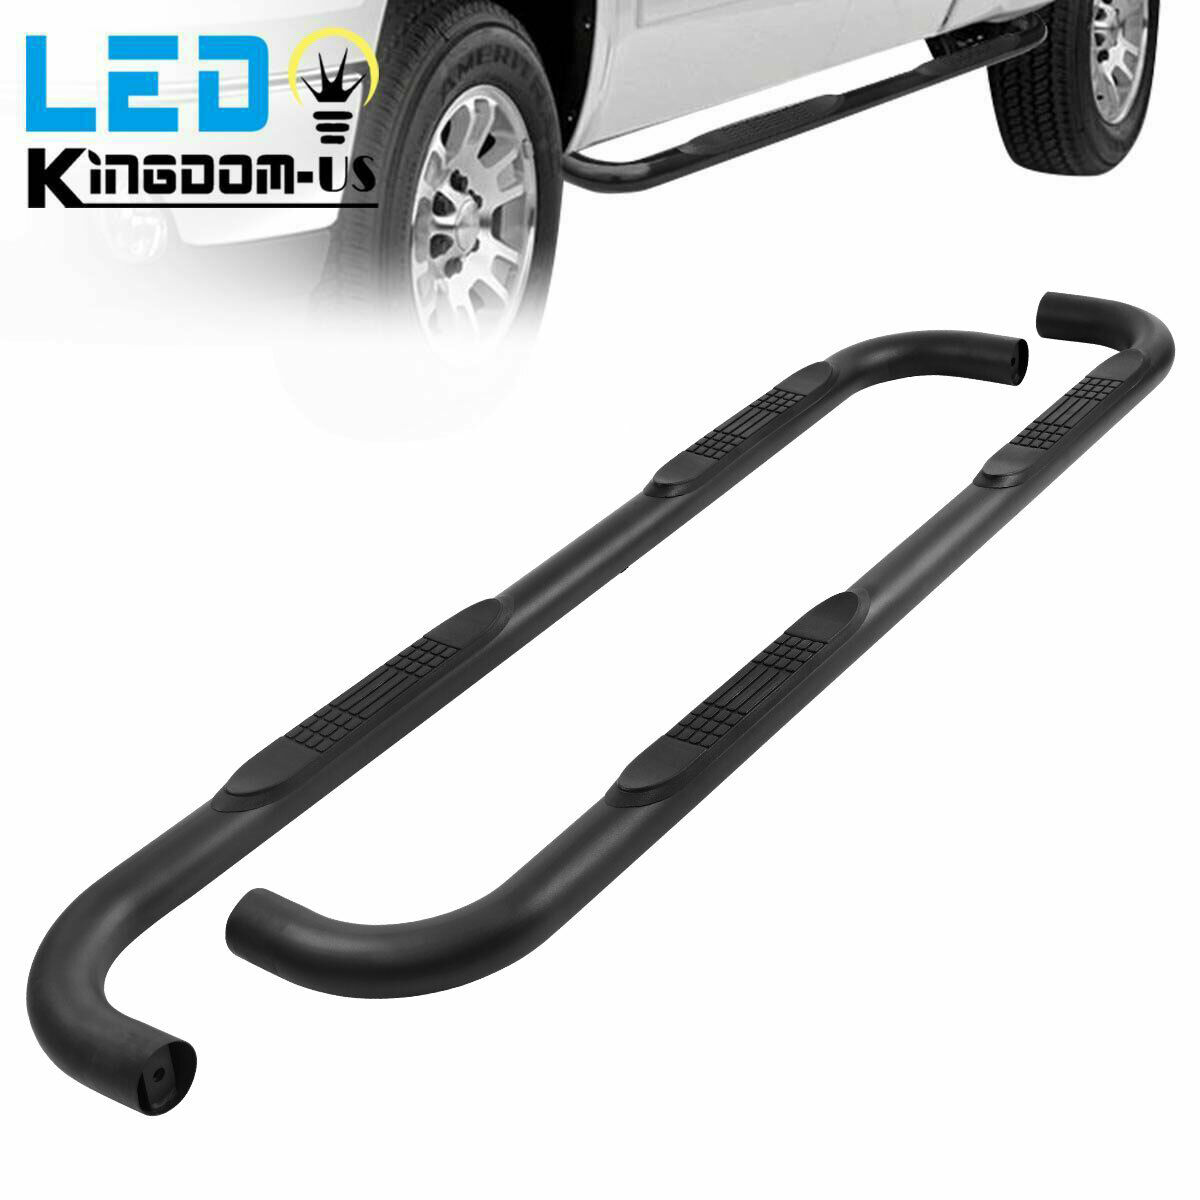 Running Boards for 99-18 Silverado/Sierra Extended Cab Round Nerf Bars Side Step